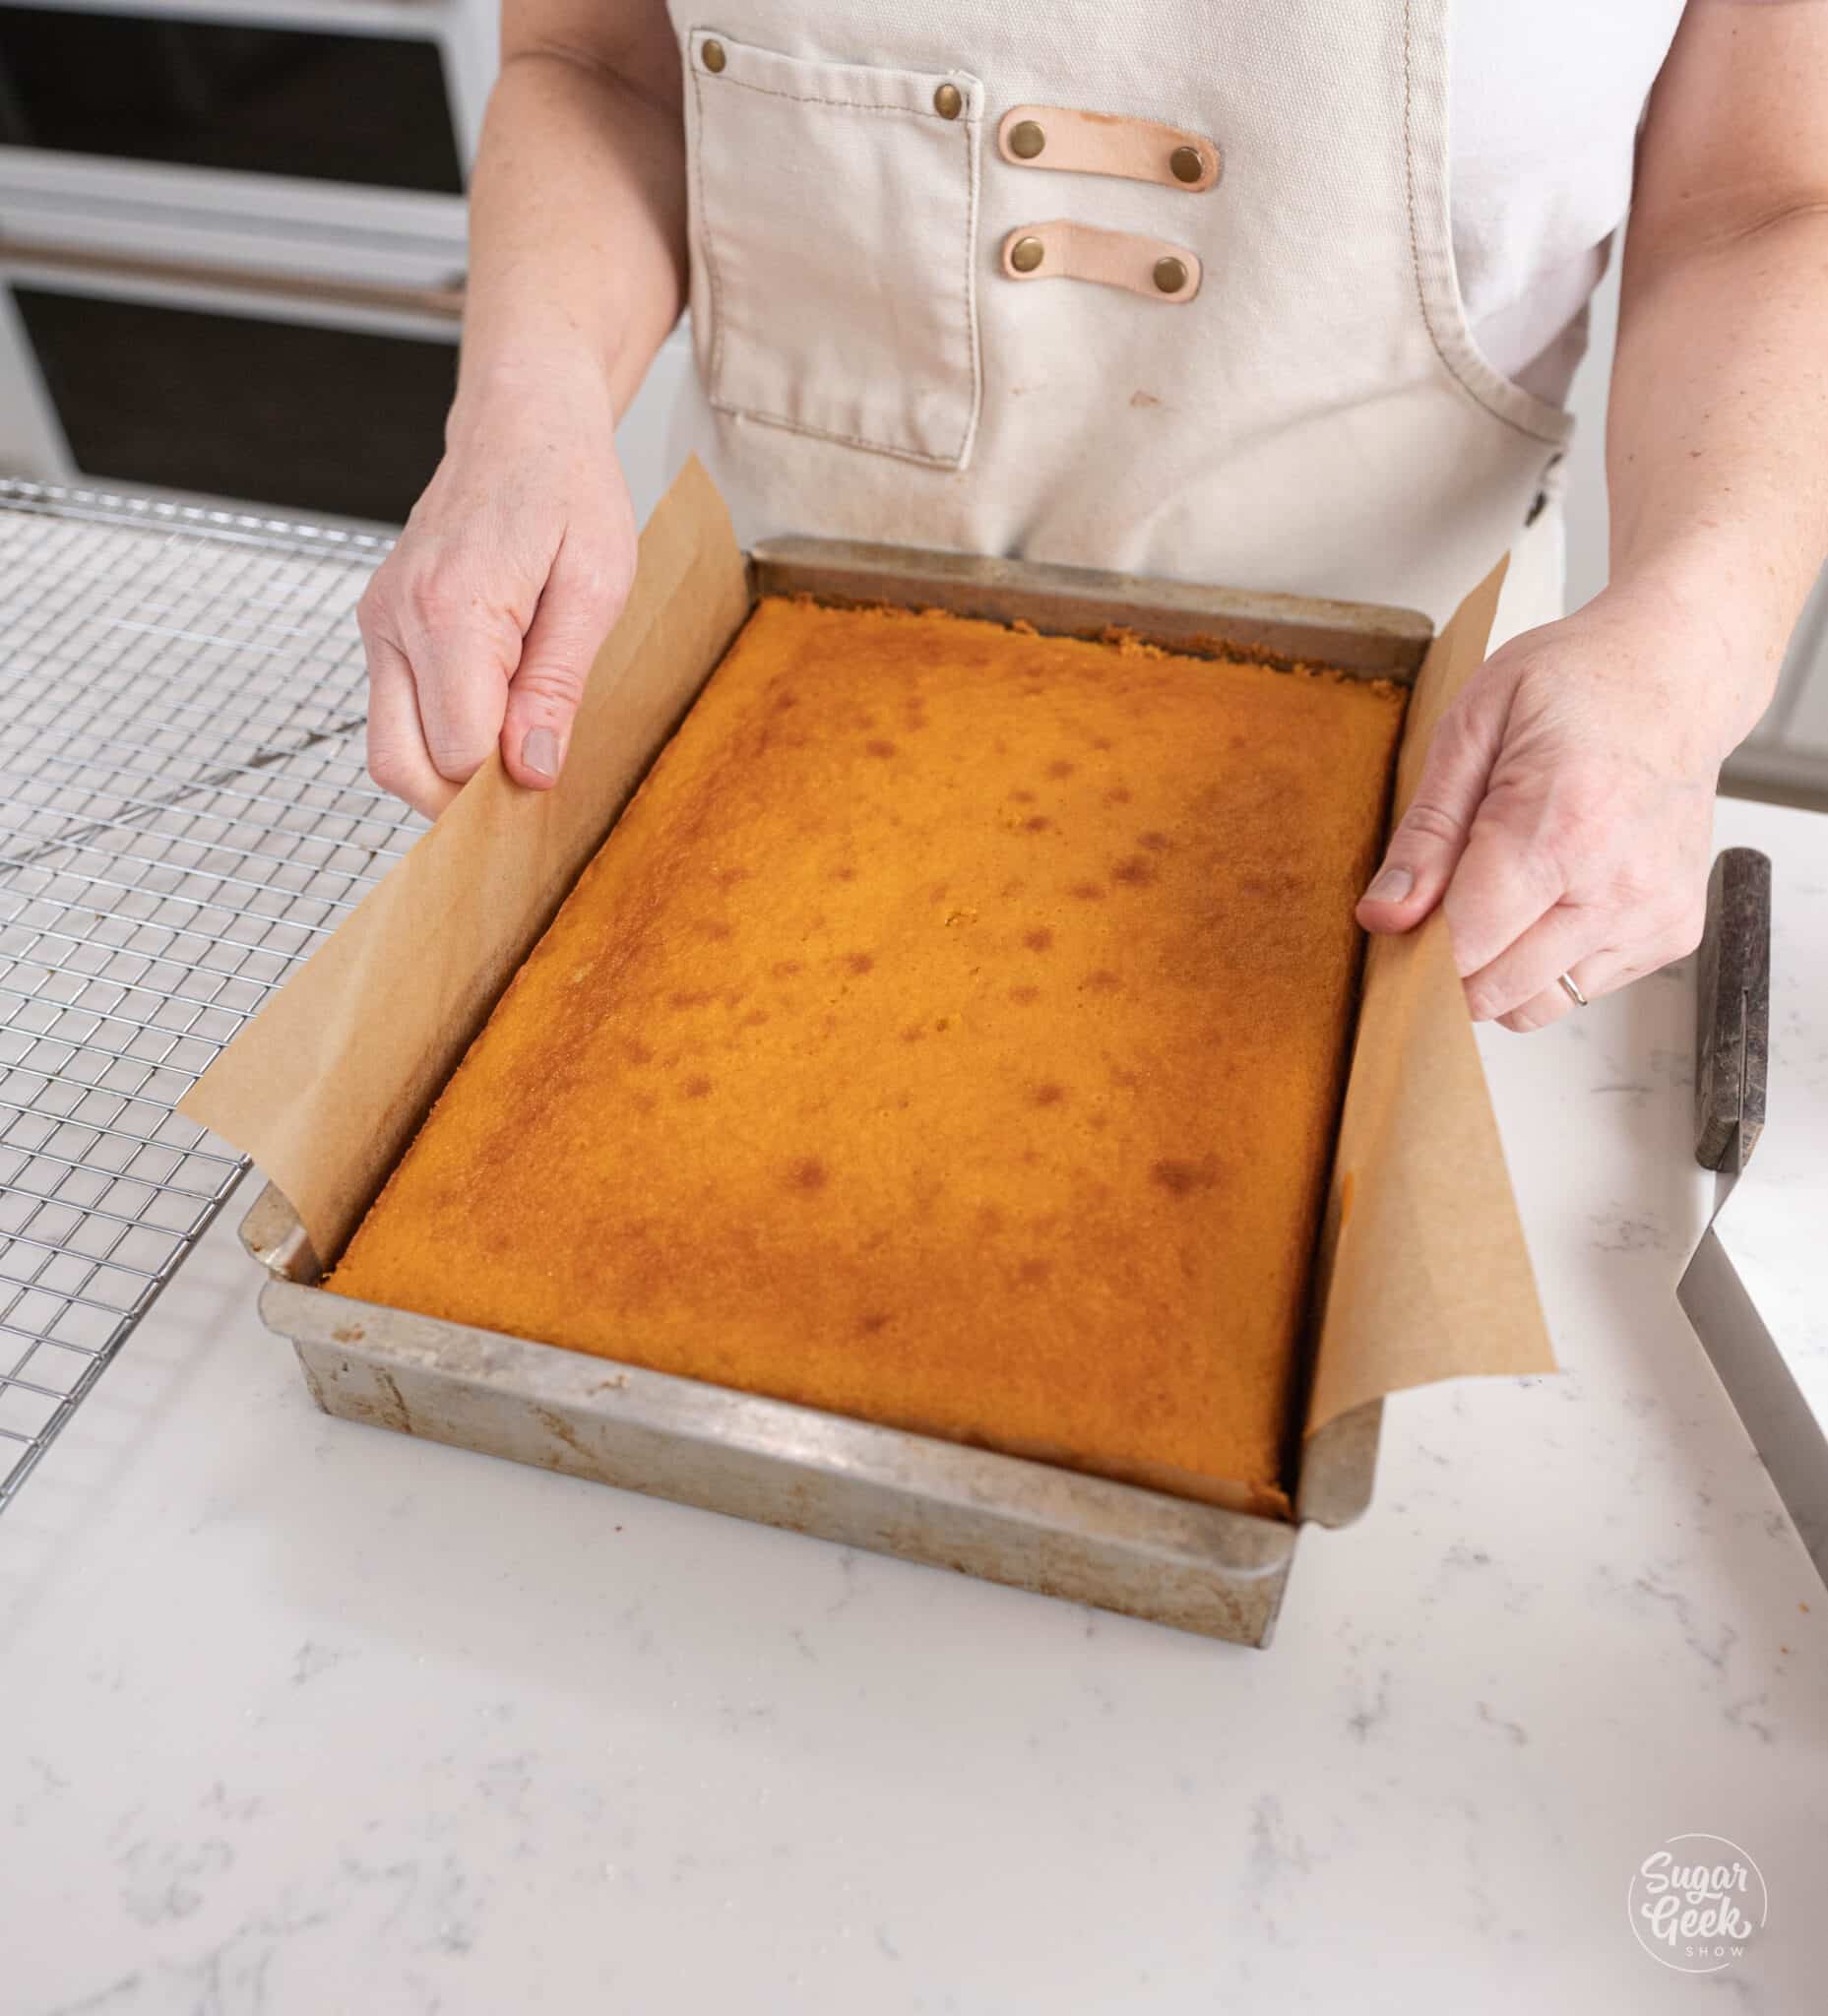 hands lifting a cake out of pan with parchment paper